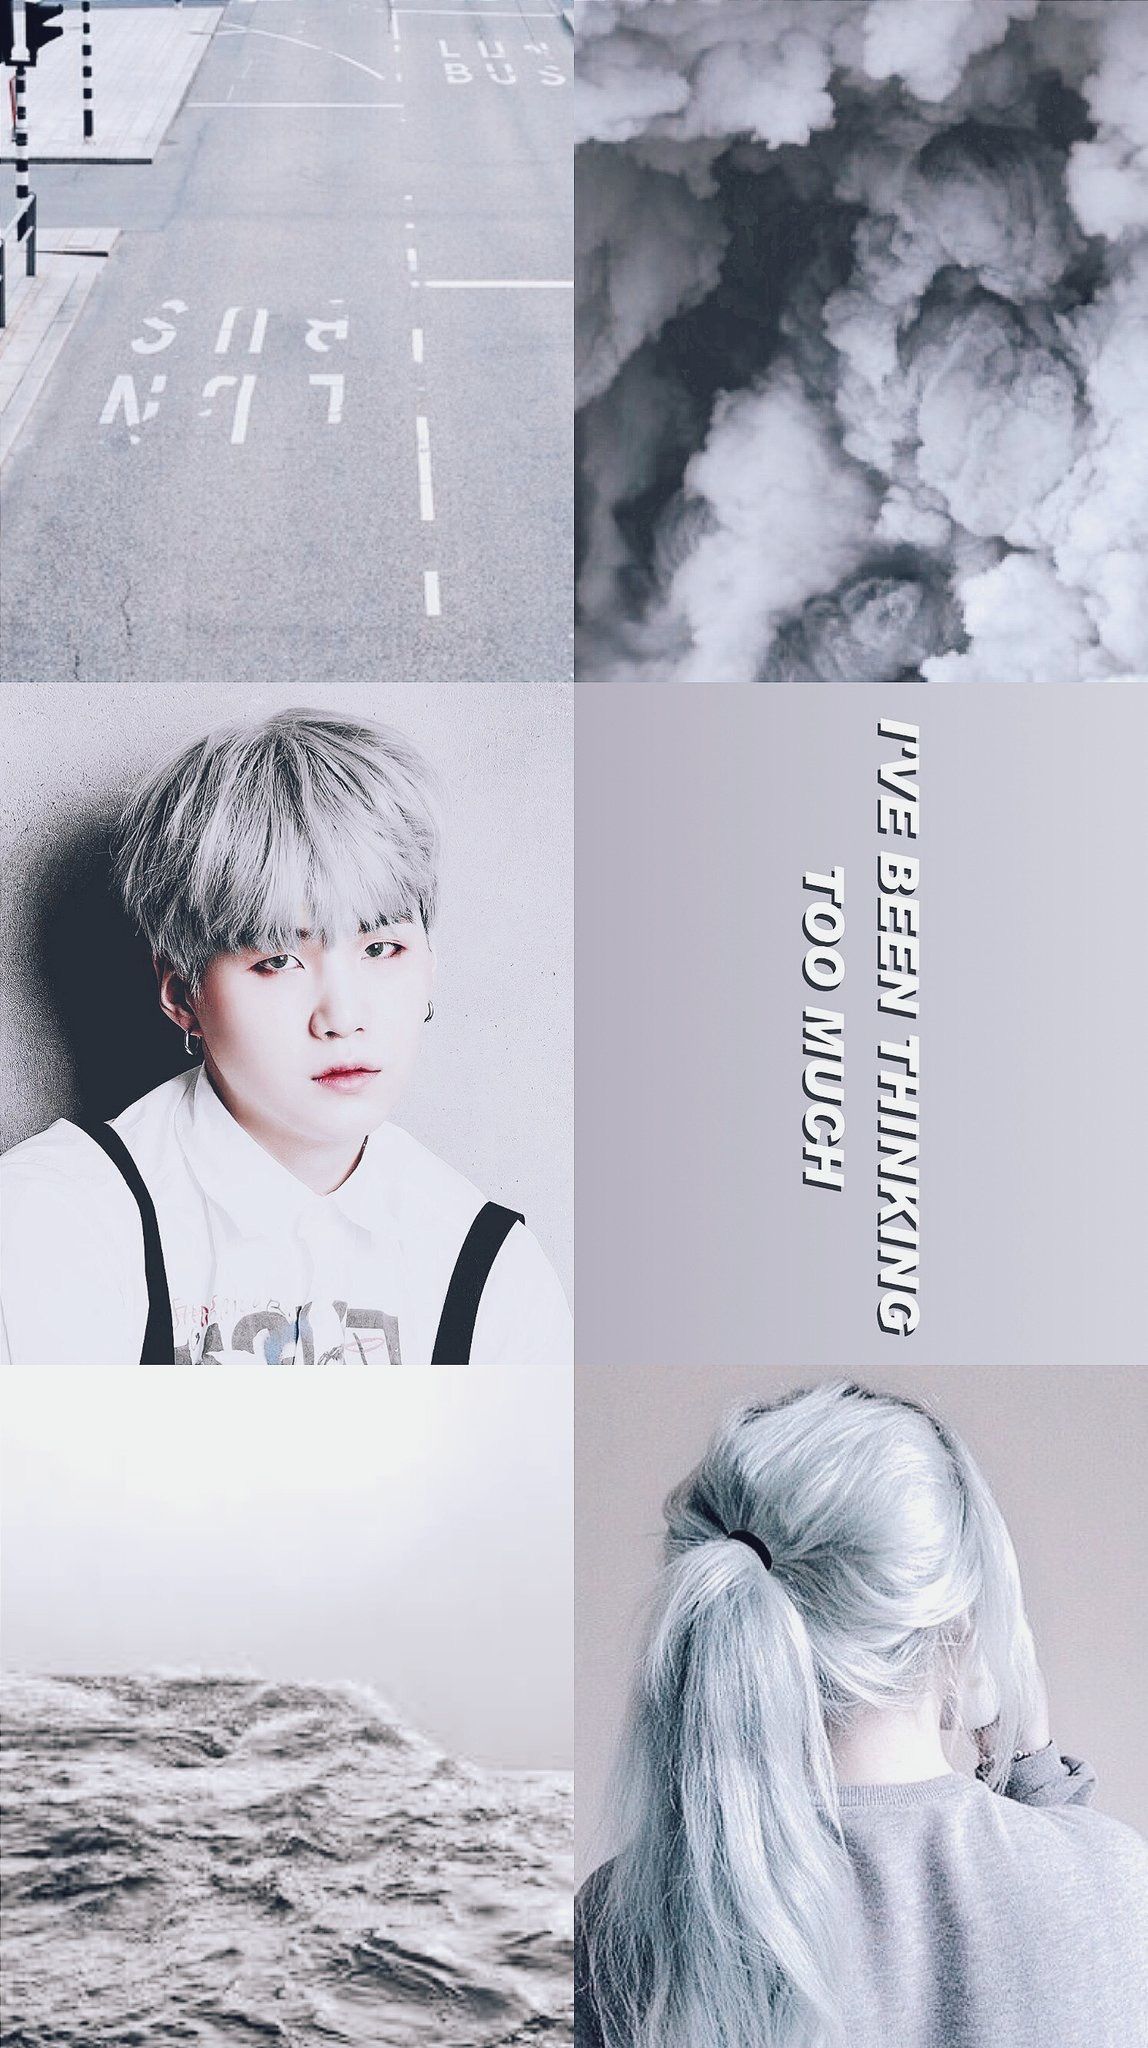 Aesthetic background for a phone - Korean, BTS